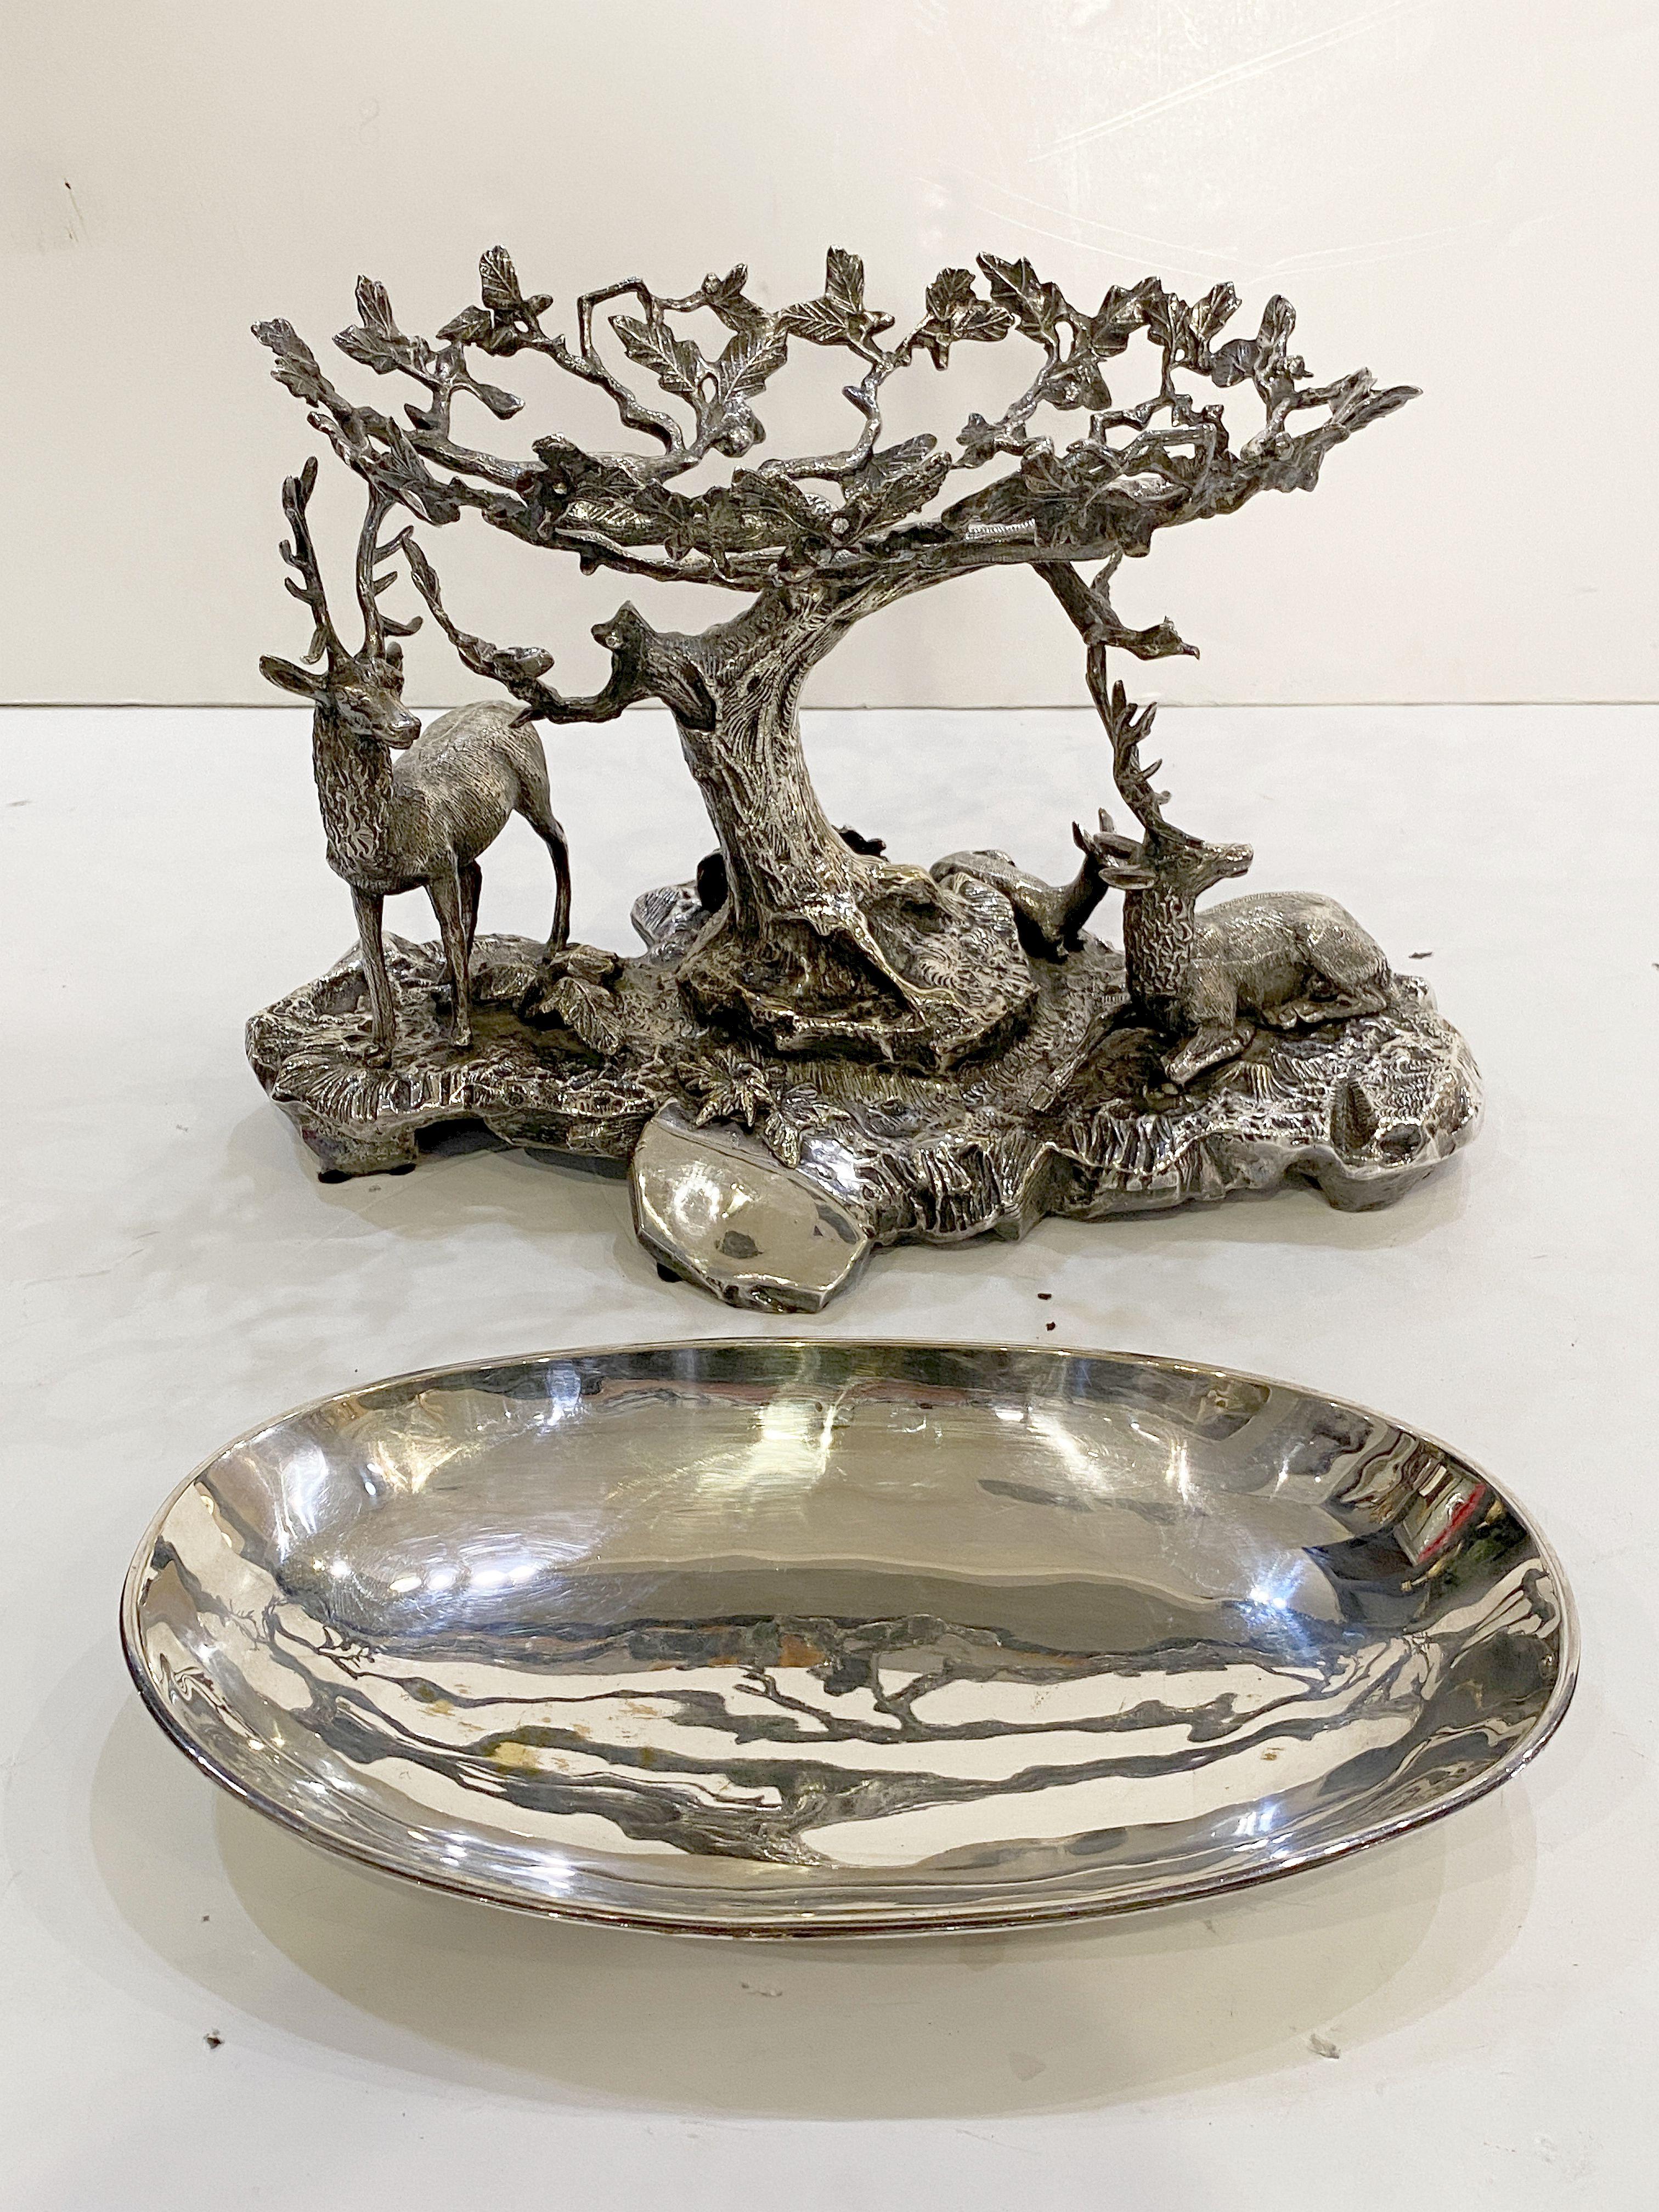 Large Valenti Stag or Deer Sculptural Centerpiece of Silver Plated Bronze  8